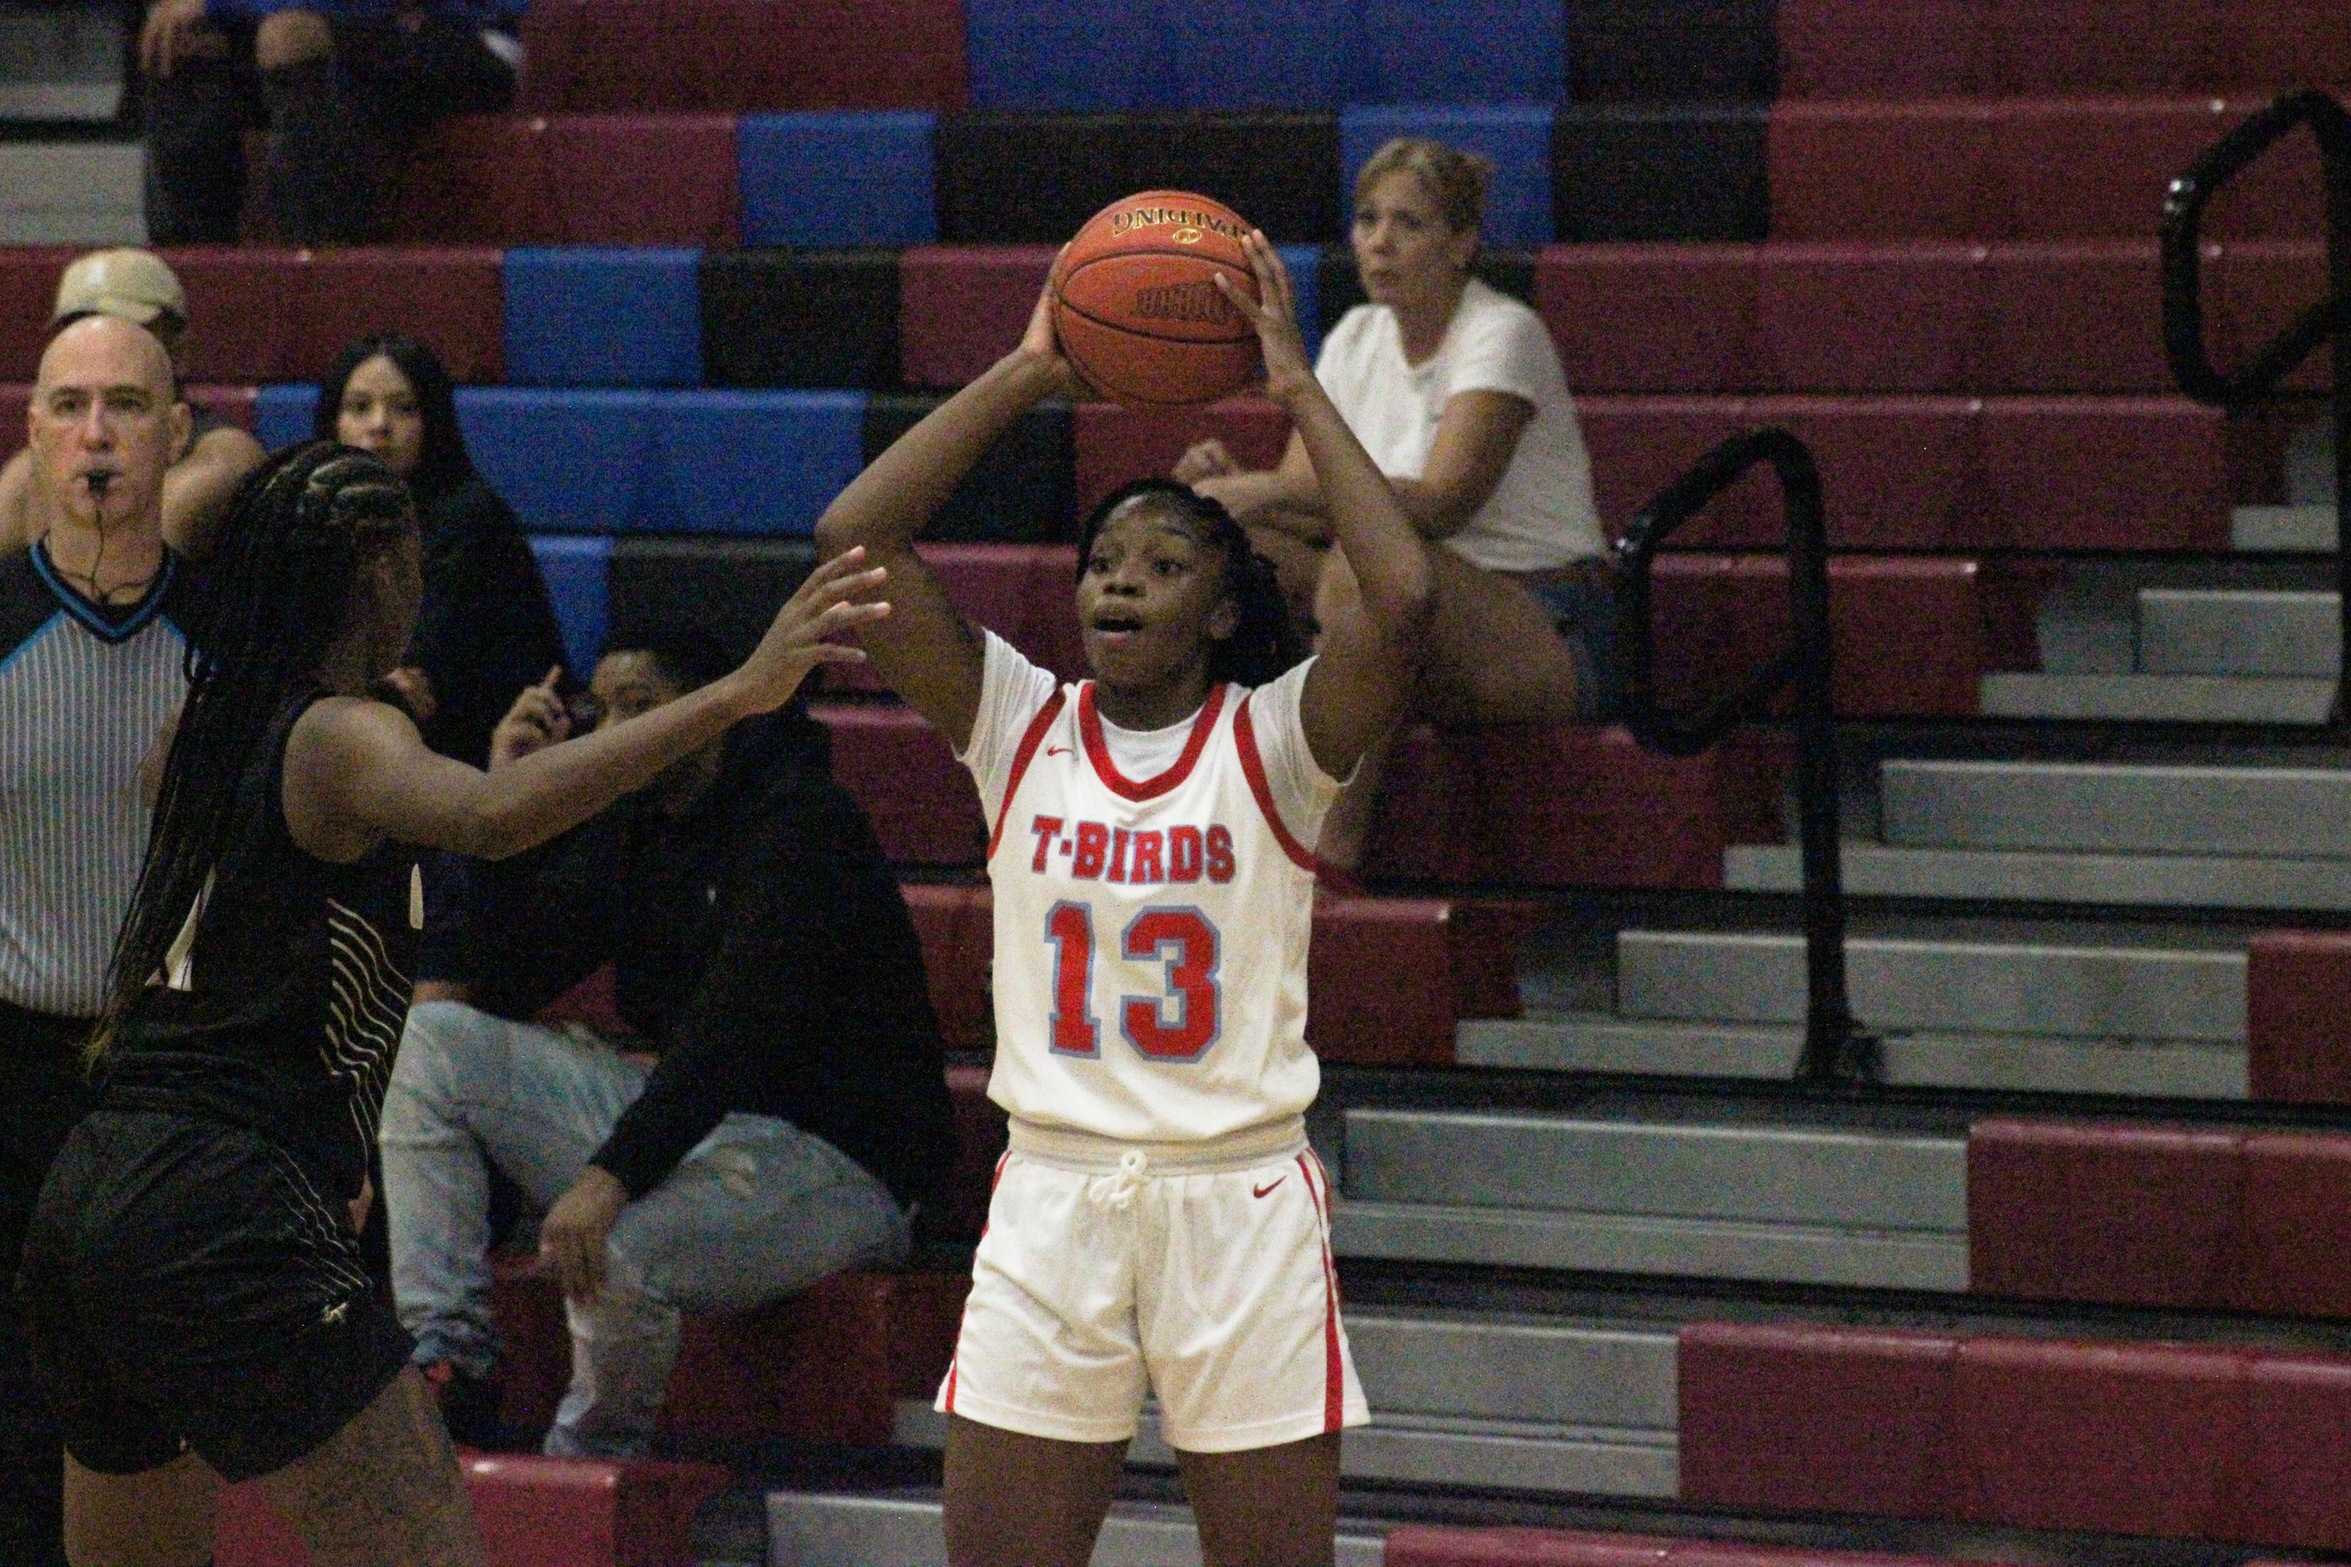 Lady T-Birds Fall to EAC, 58-50